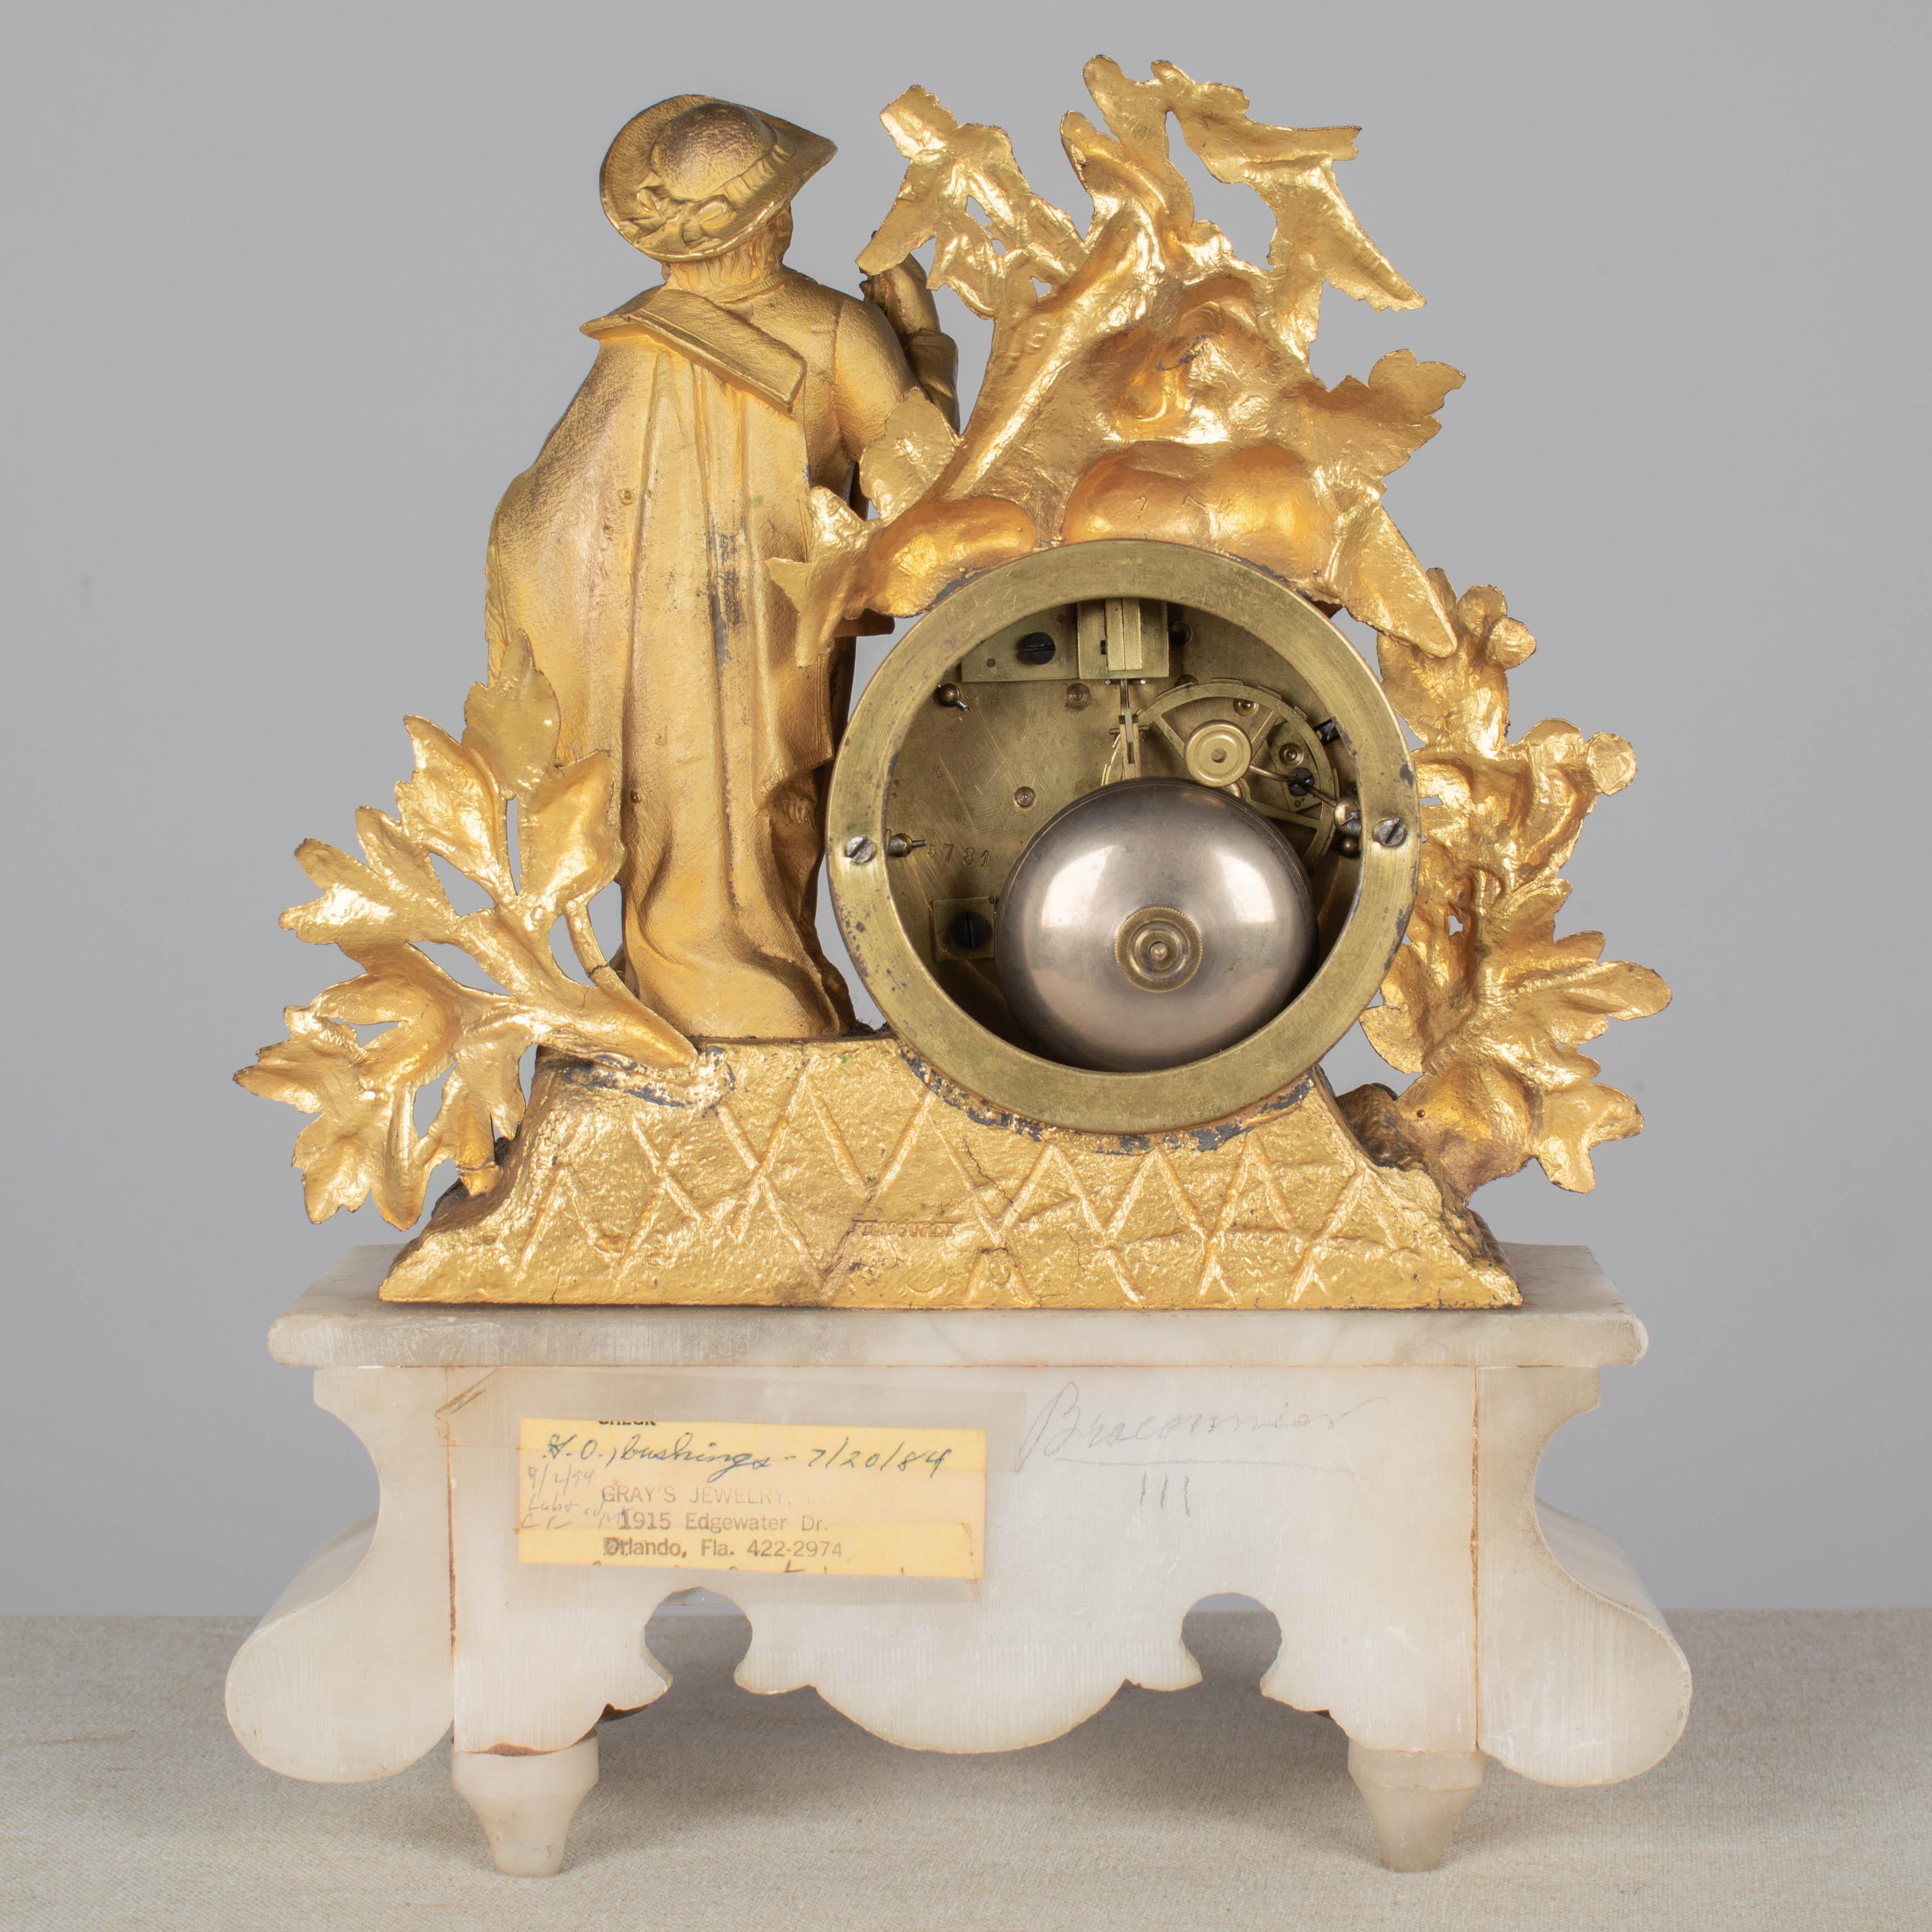 19th Century French Gilt Bronze Mantel Clock by Philippe Mourey 1